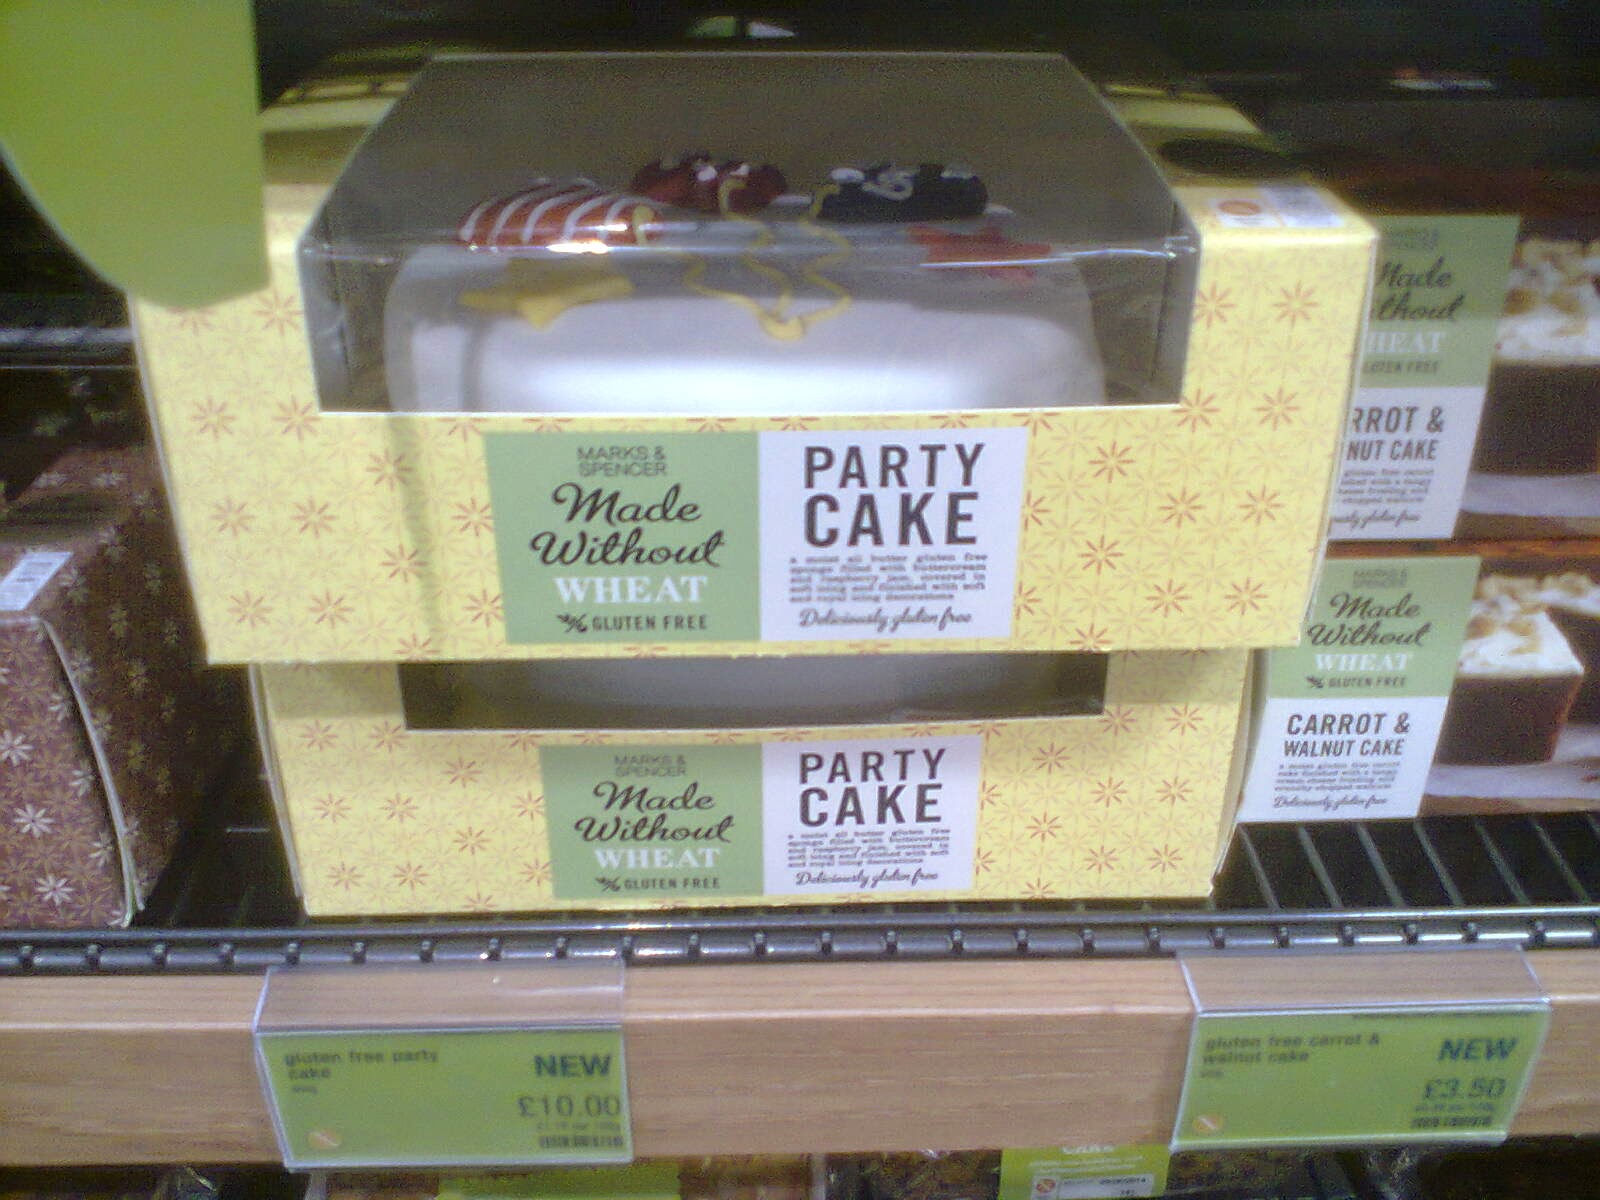 The Marks and Spencer Made Without Wheat 'Party Cake'. I hope I get one of these on my next birthday.